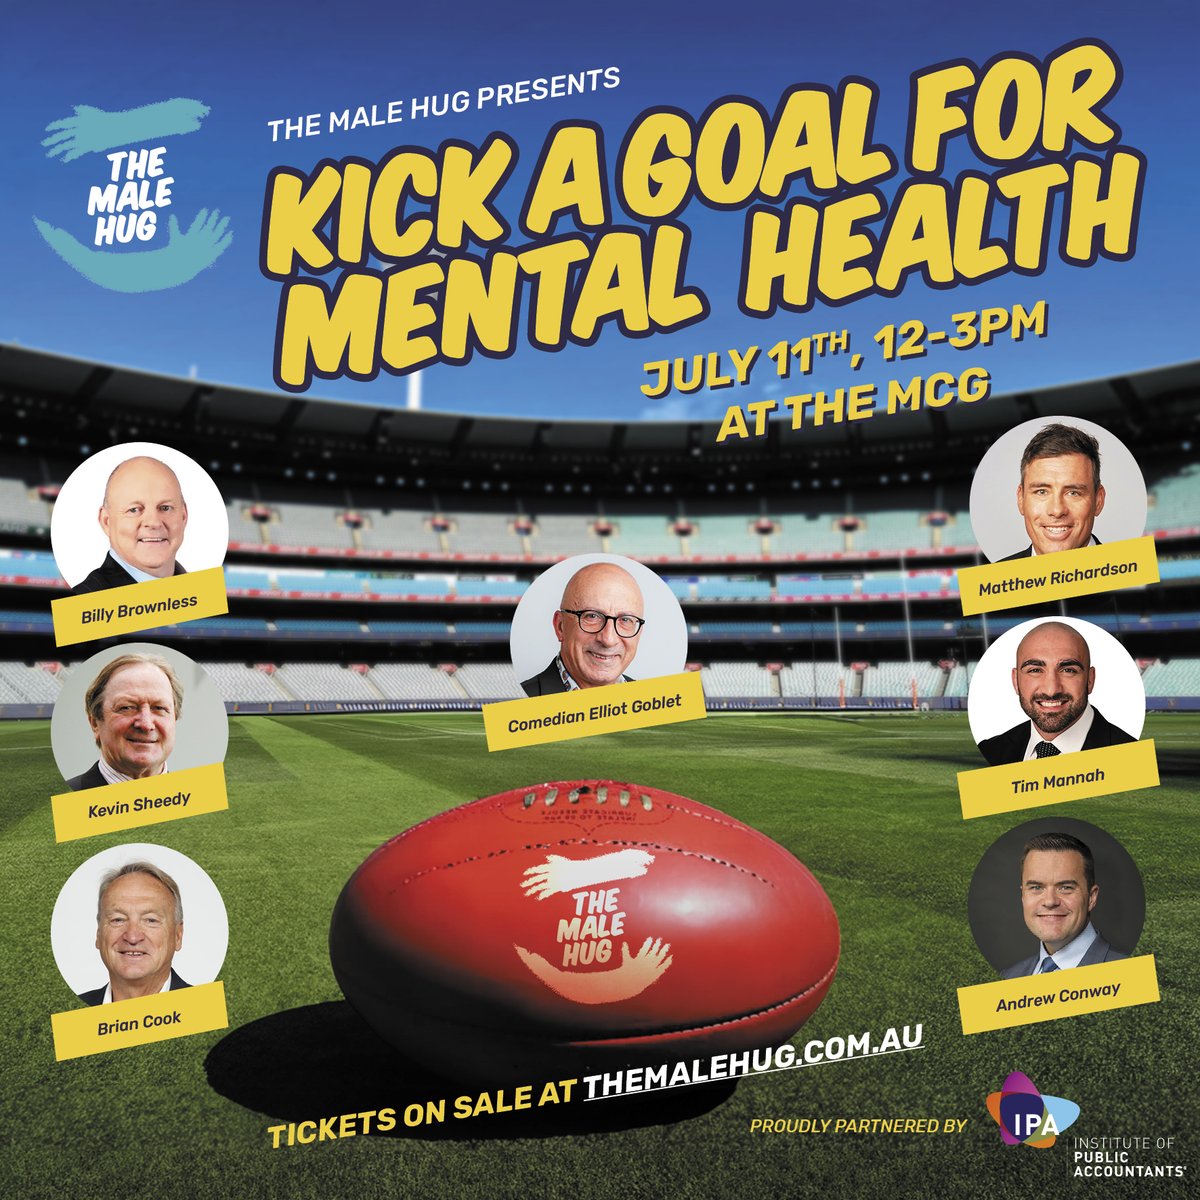 Kick a Goal for #MentalHealth at the @mcg is back! Join us for another huge star-studded lineup of special guest speakers, & panellists with exclusive memorabilia up for auction. On sale at themalehug.com.au @tim_mannah @mattricho0 @ipaaccountants #EOFY #CorporateLunch